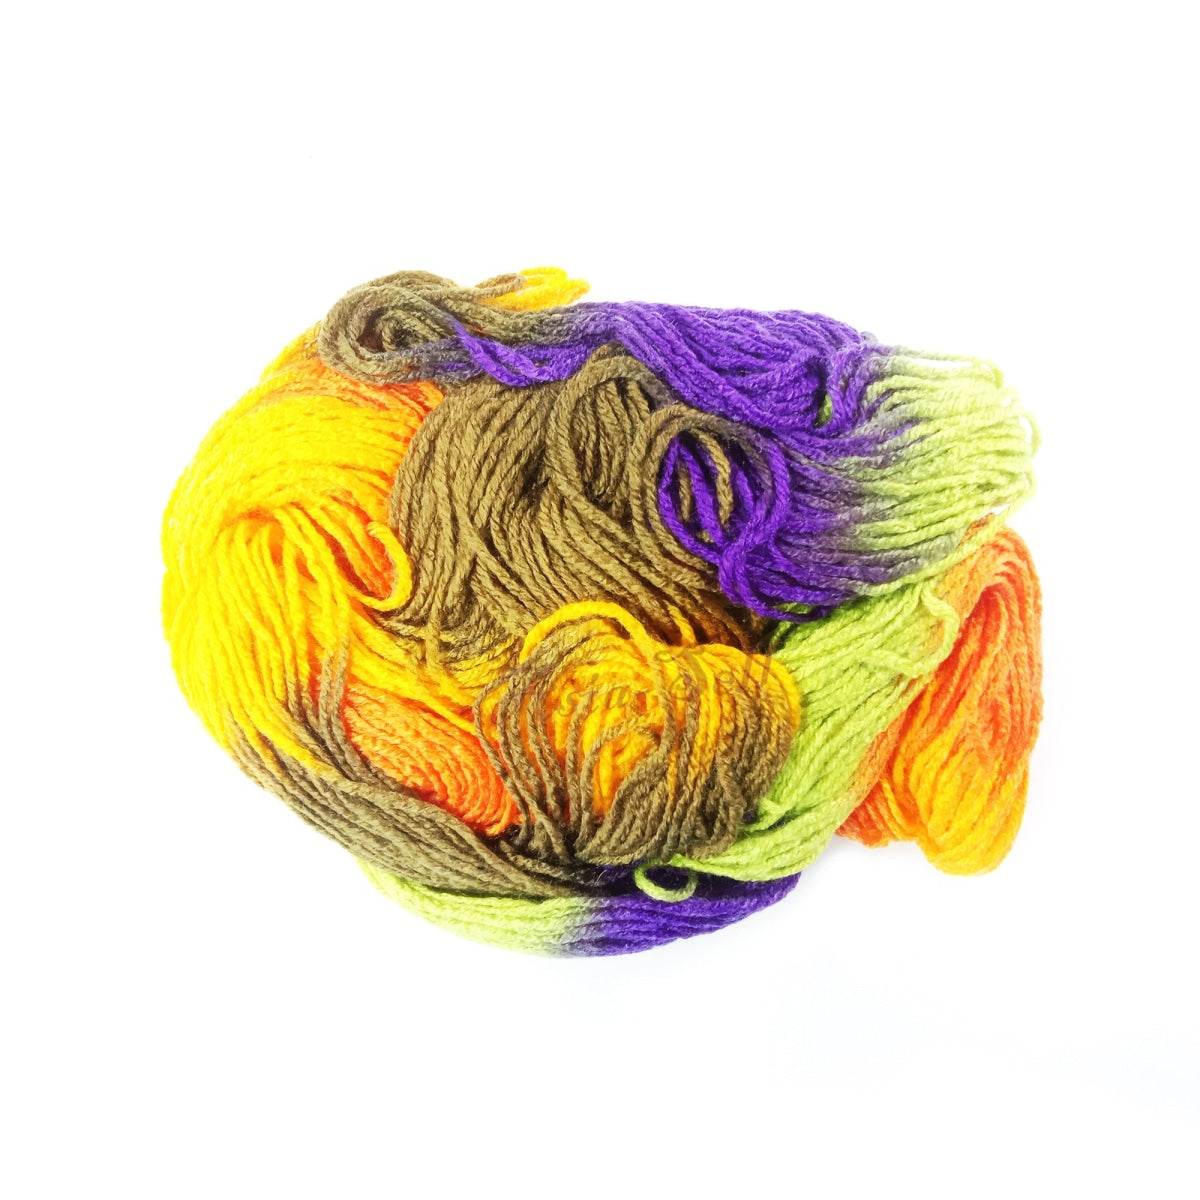 50G Ball Of Knitting Yarn Mixed Colourful Dyed Crochet Thread Multicoloured Craft 4 Clothing Buttons